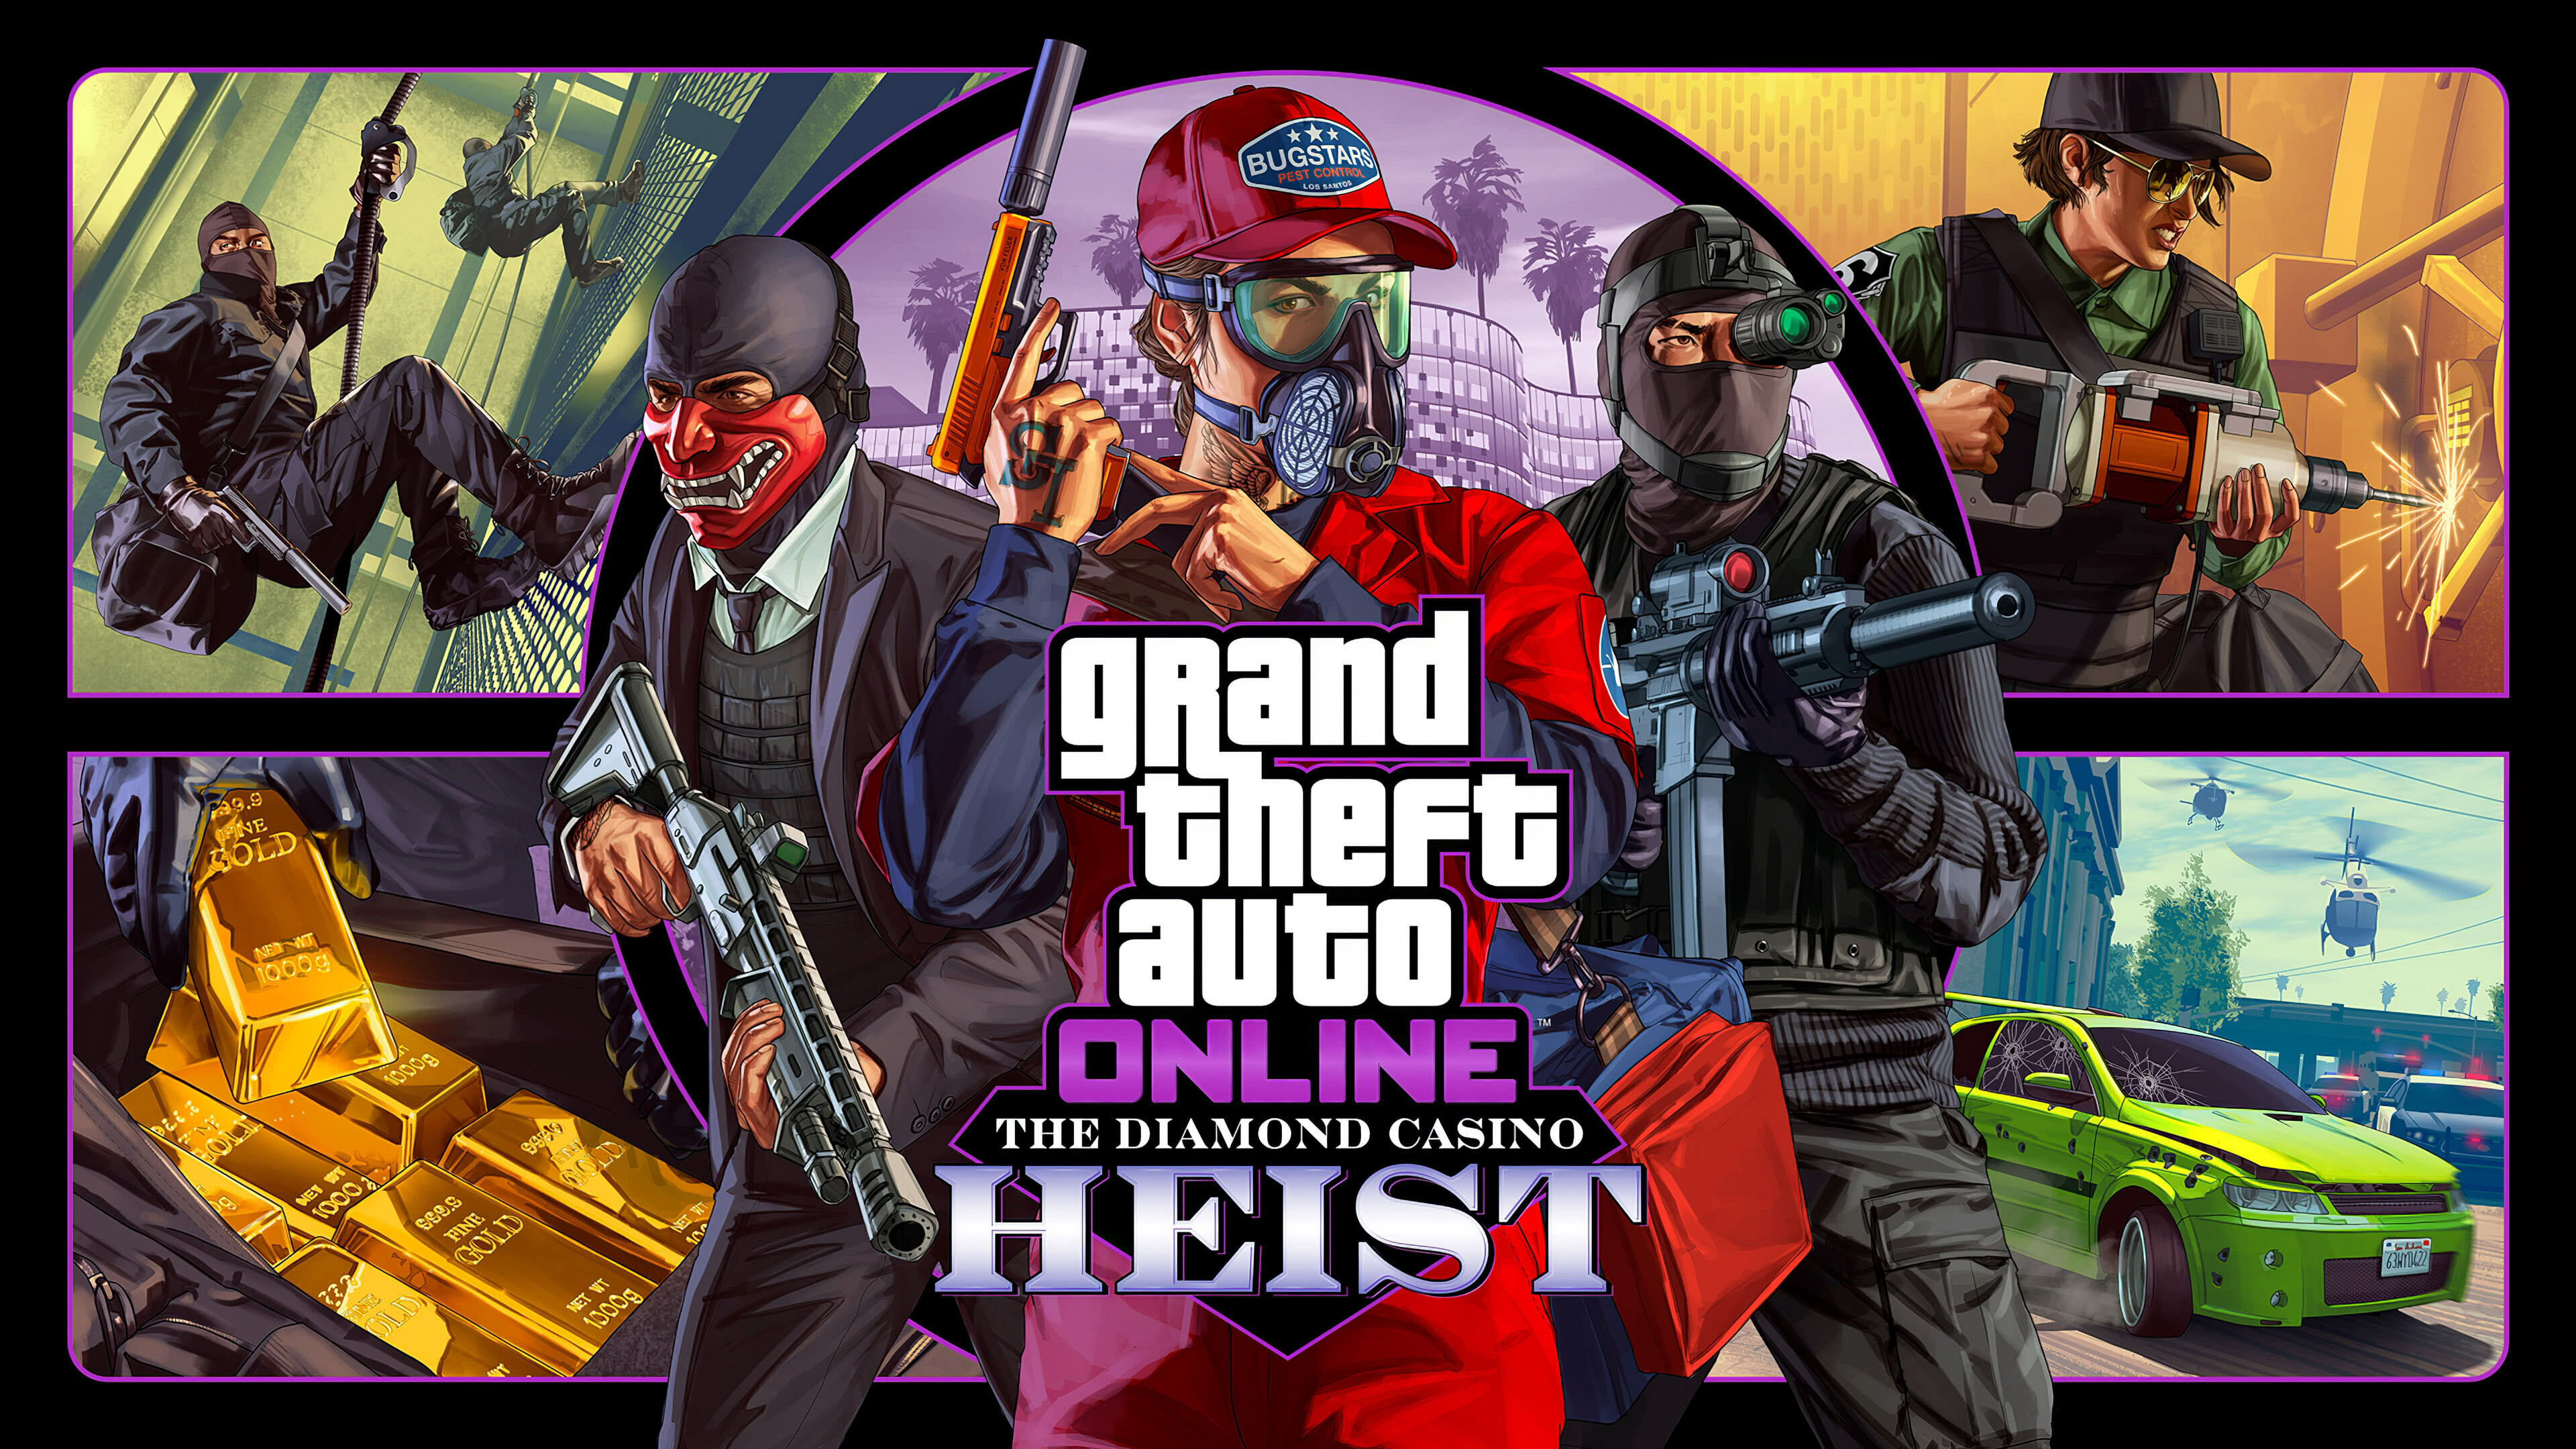 Grand Theft Auto 5: The Diamond Casino Heist, A content update for GTA Online, Released on December 12th, 2019. 3840x2160 4K Background.